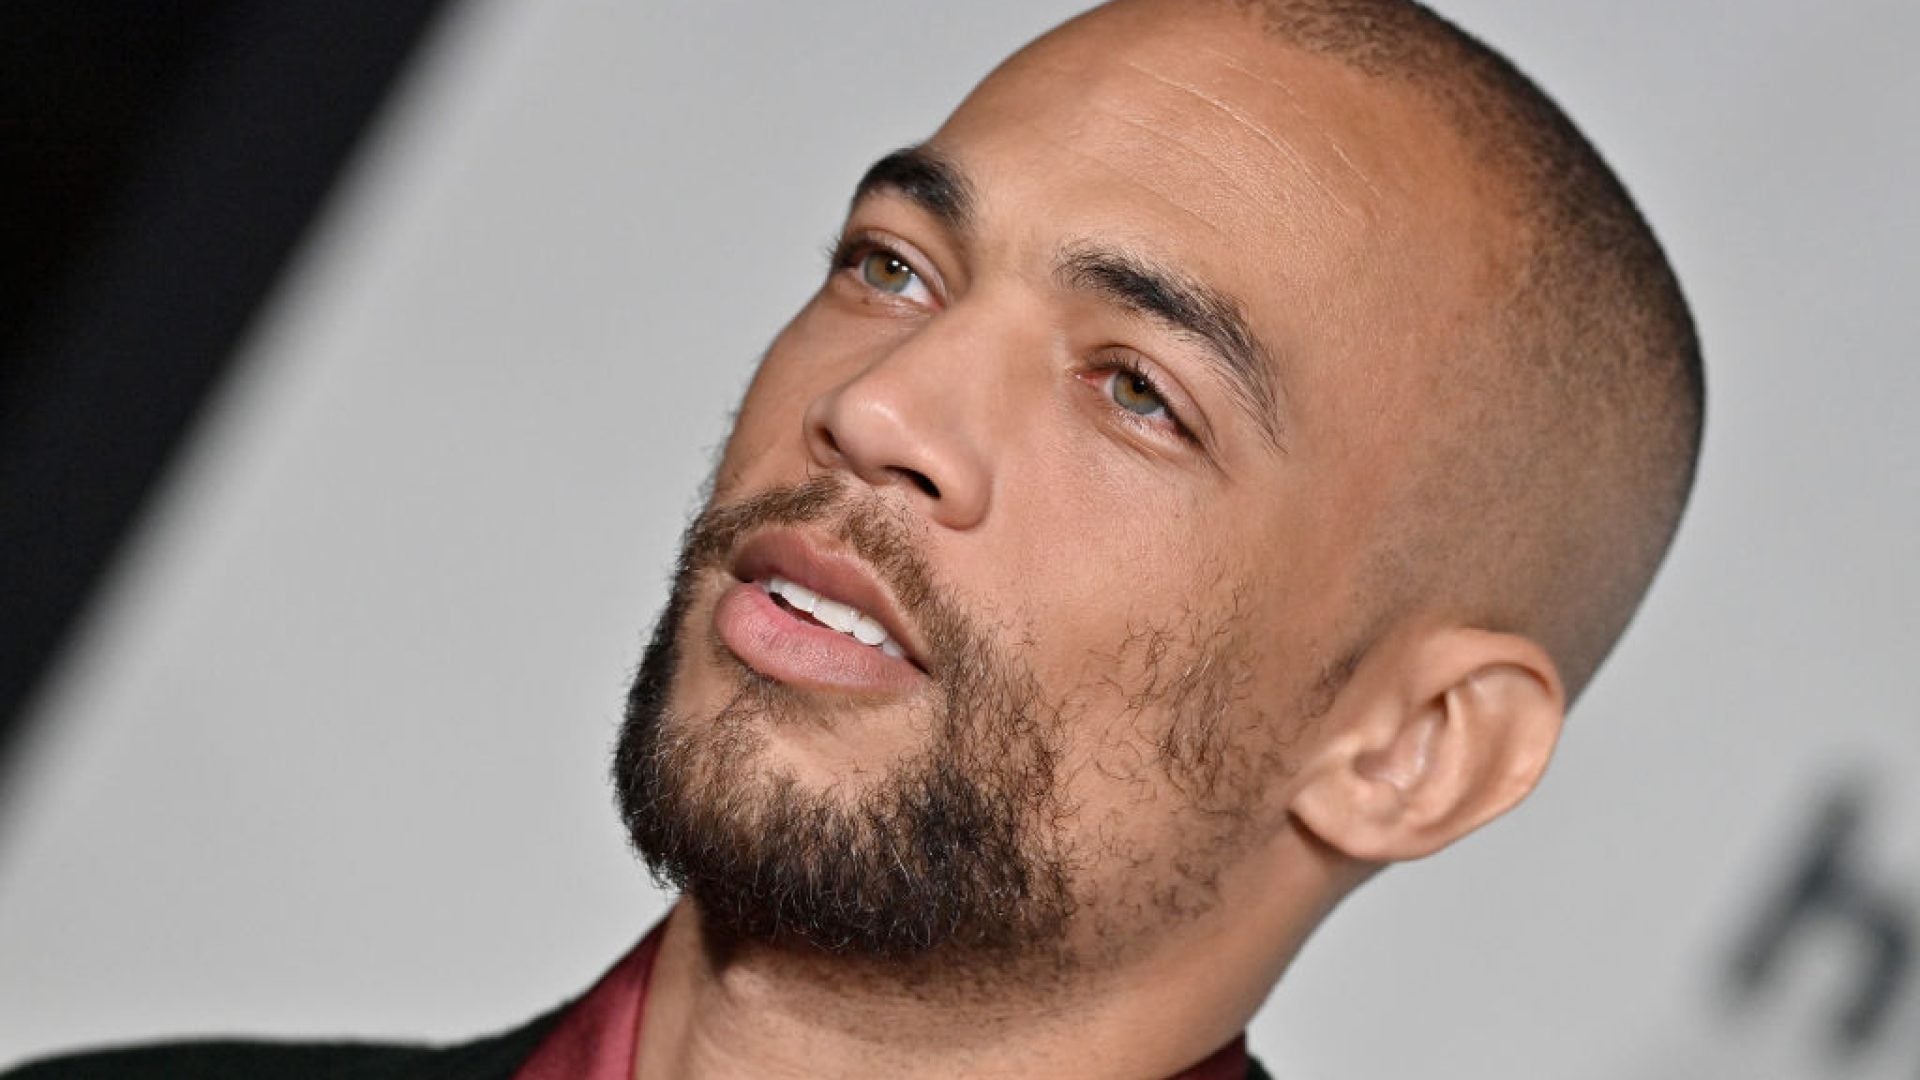 "The People At The Top Are Counting On Us Keeping Up The Hollywood Facade" Actor Kendrick Sampson Calls Out Industry Execs Amid Strikes